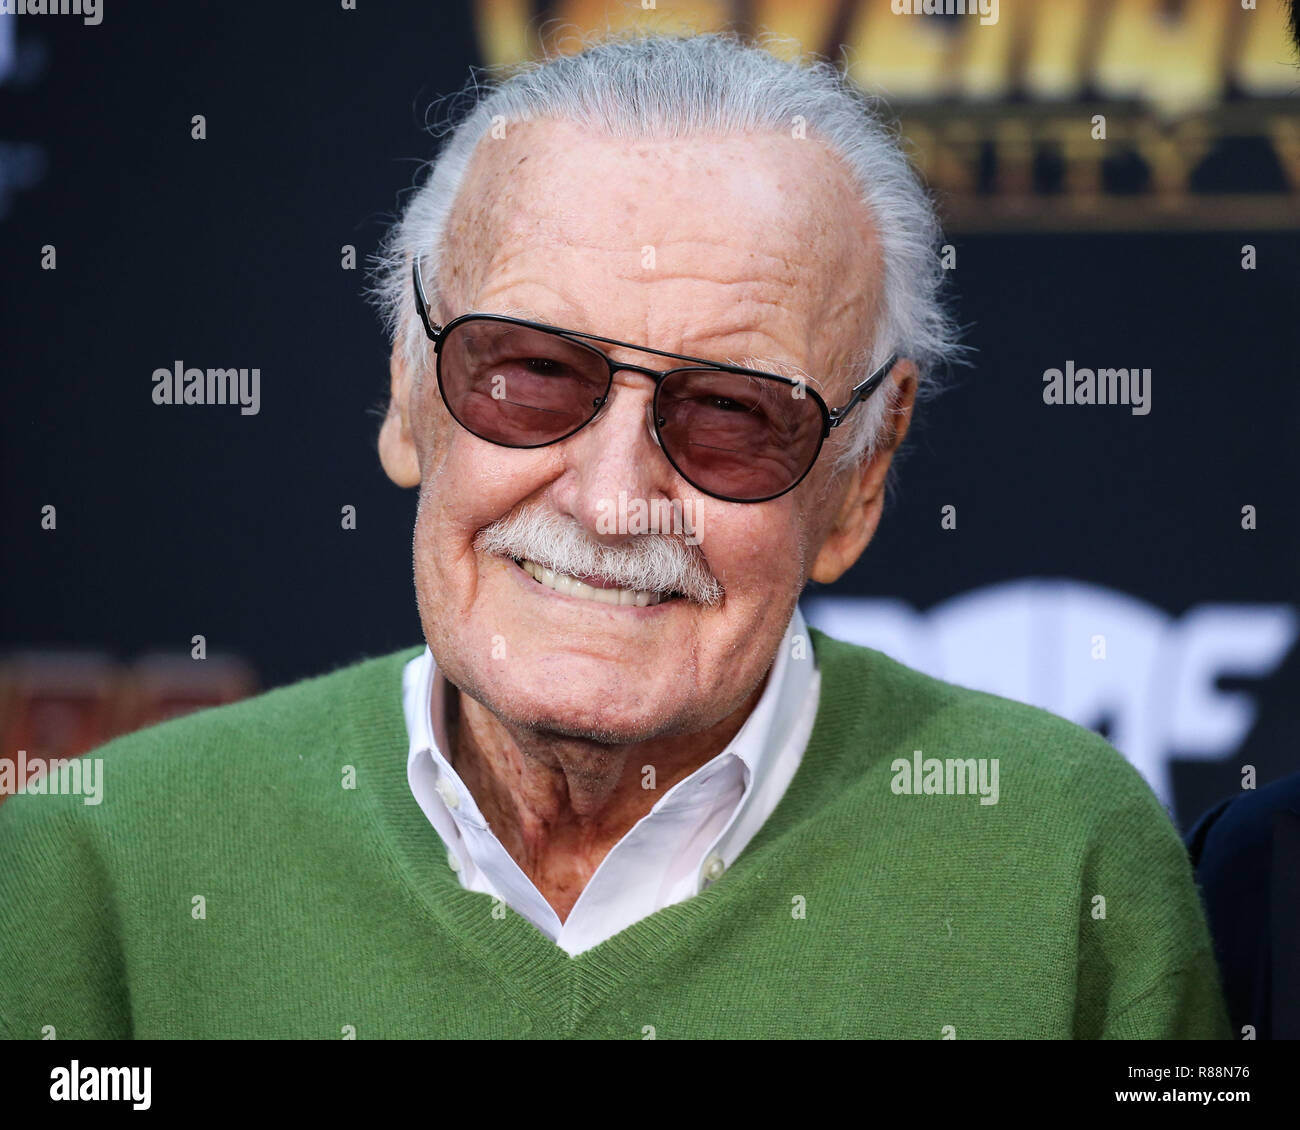 (FILE) Stan Lee Dies At 95. Stan Lee, the legendary writer, editor and publisher of Marvel Comics whose fantabulous but flawed creations made him a real-life superhero to comic book lovers everywhere, has died. He was 95. Lee, who began in the business in 1939 and created or co-created Black Panther, Spider-Man, the X-Men, the Mighty Thor, Iron Man, the Fantastic Four, the Incredible Hulk, Daredevil and Ant-Man, among countless other characters, died early Monday morning at Cedars-Sinai Medical Center in Los Angeles, a family representative told The Hollywood Reporter. HOLLYWOOD, LOS ANGELES,  Stock Photo